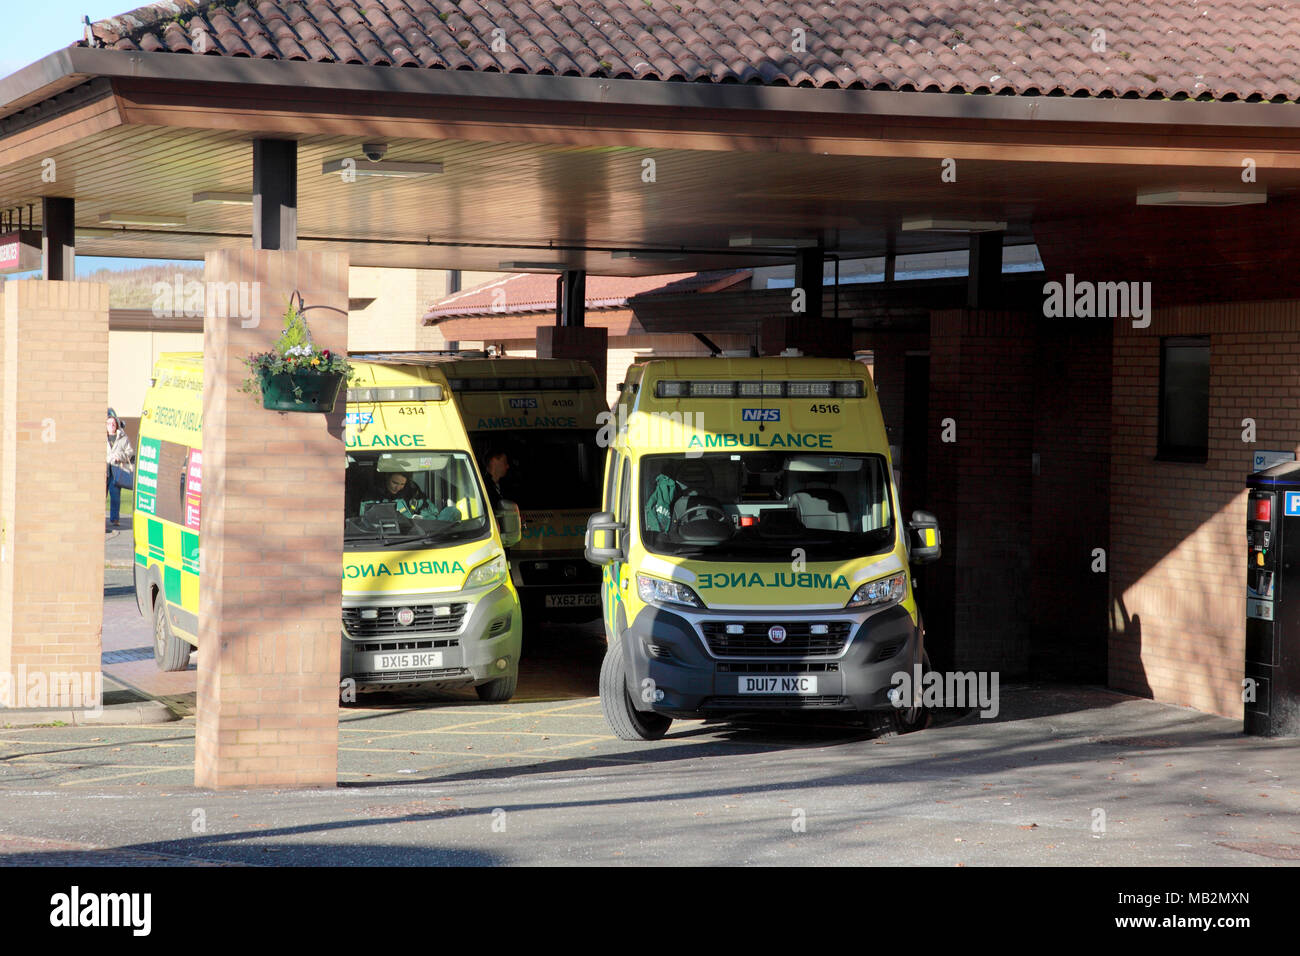 The Accident and Emergency (A&E) entrance to the Princess Royal Hospital, part of the Shrewsbury and Telford Hospital Trust Stock Photo